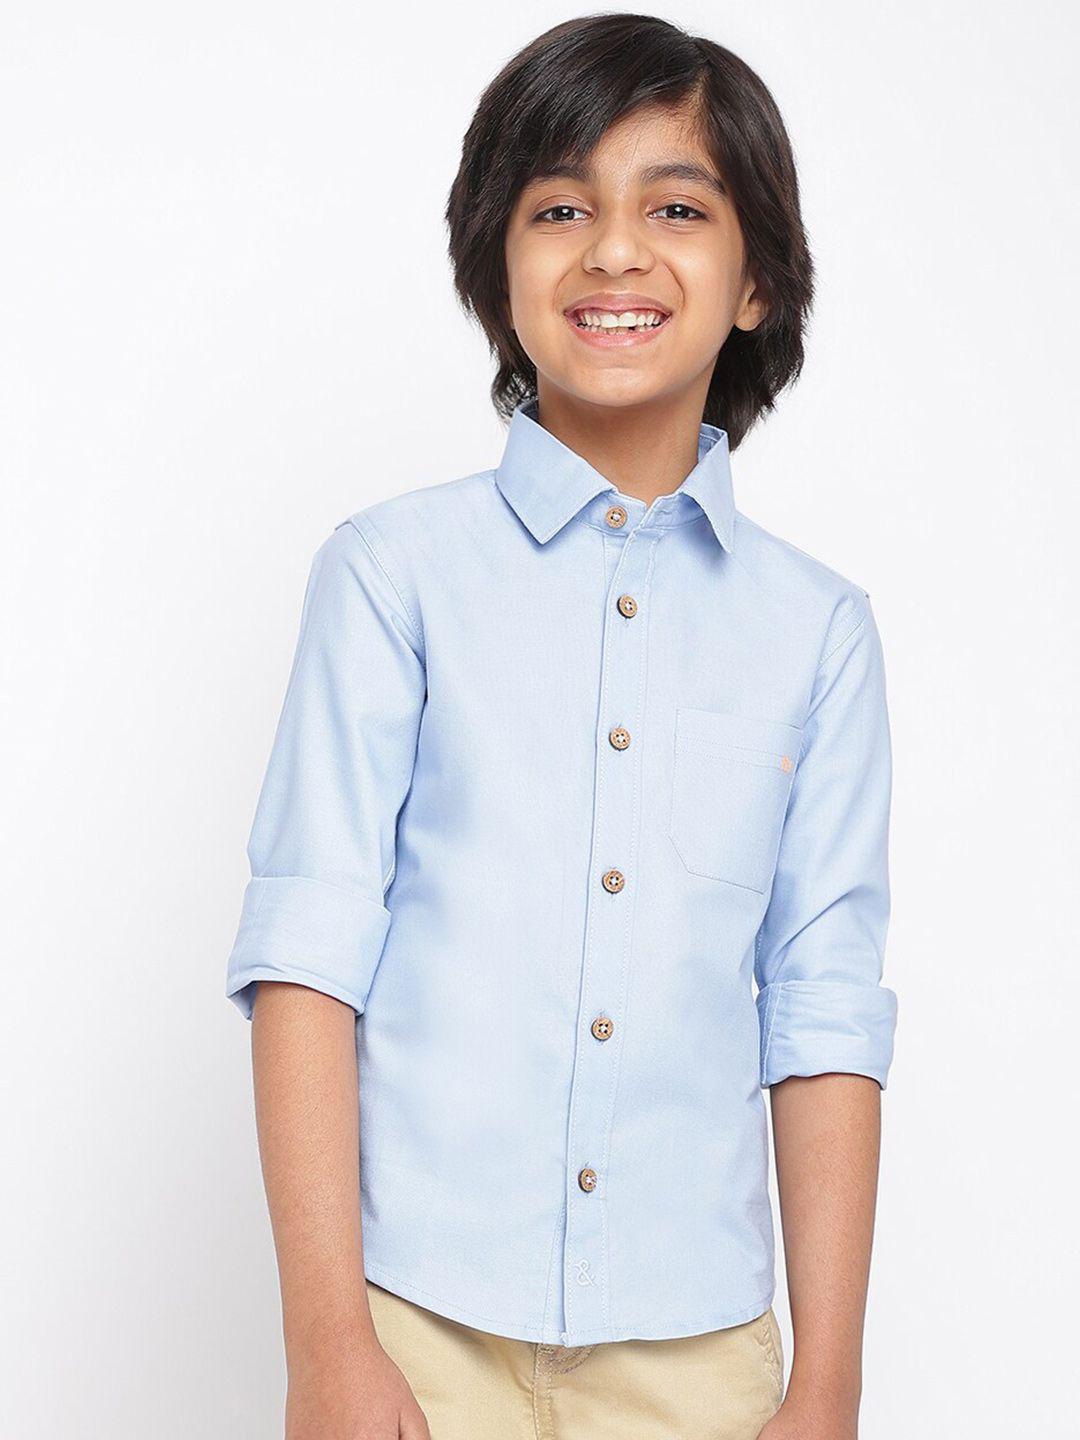 tales & stories boys blue casual shirt